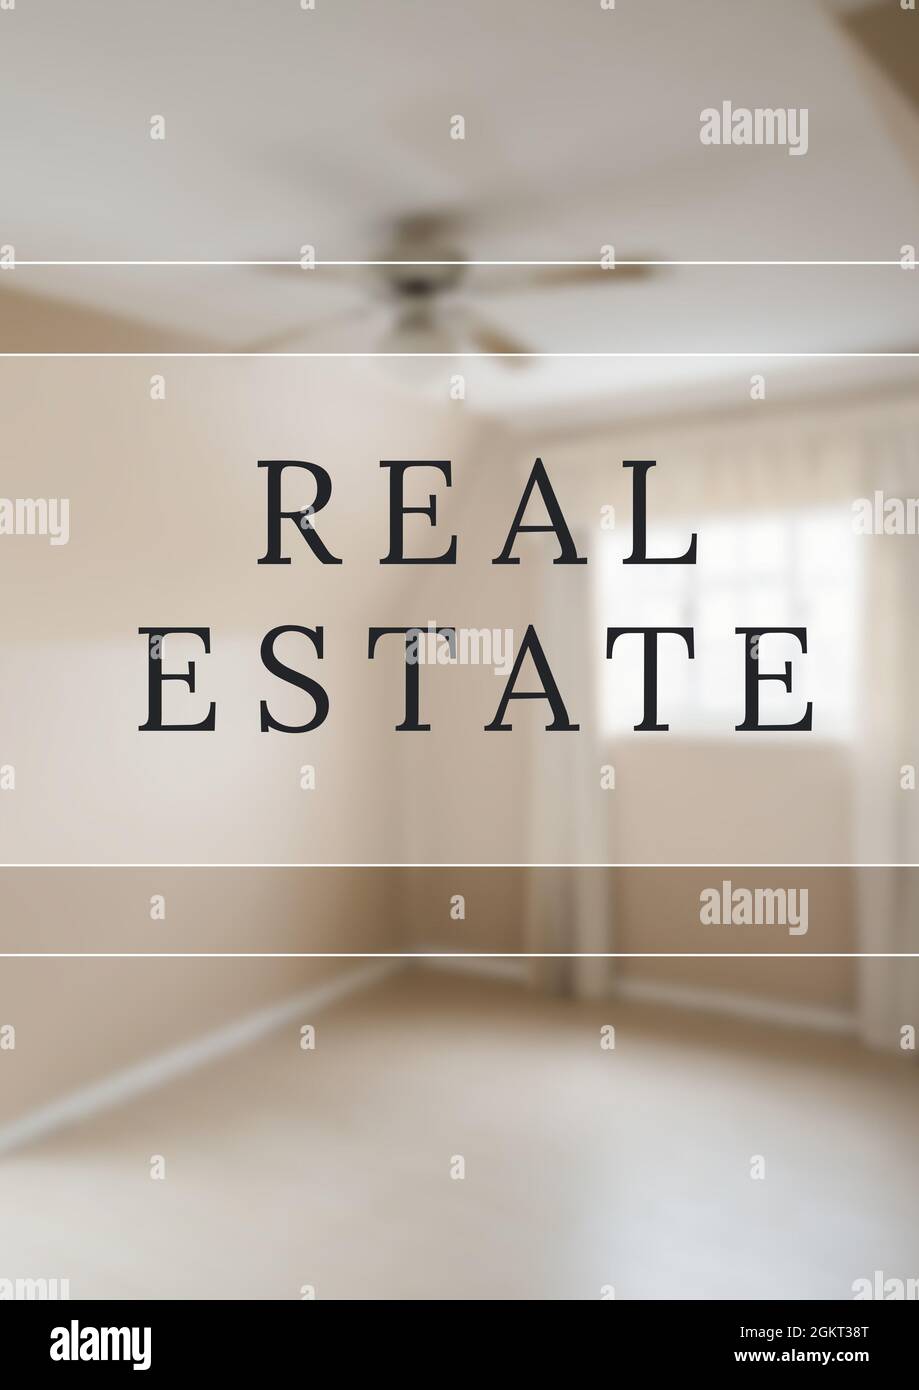 Real estate text banner over modern interior of house Stock Photo